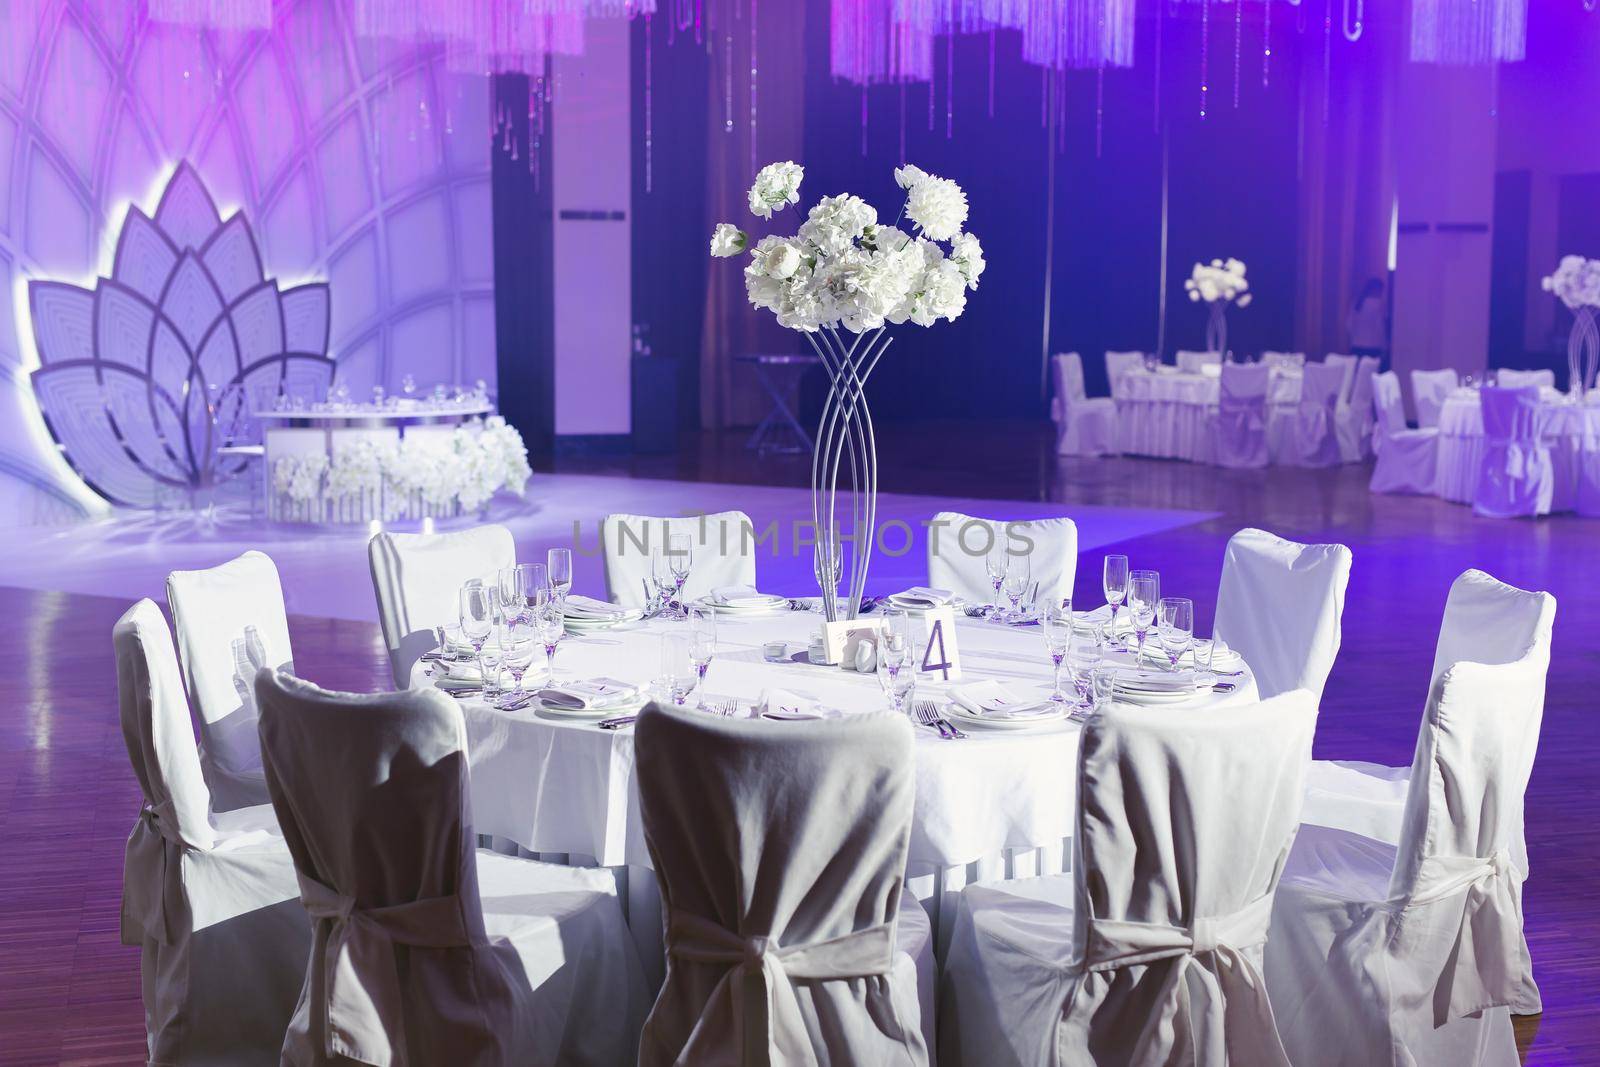 Elegant wedding banquet decoration and table setting in the restaurant by StudioPeace